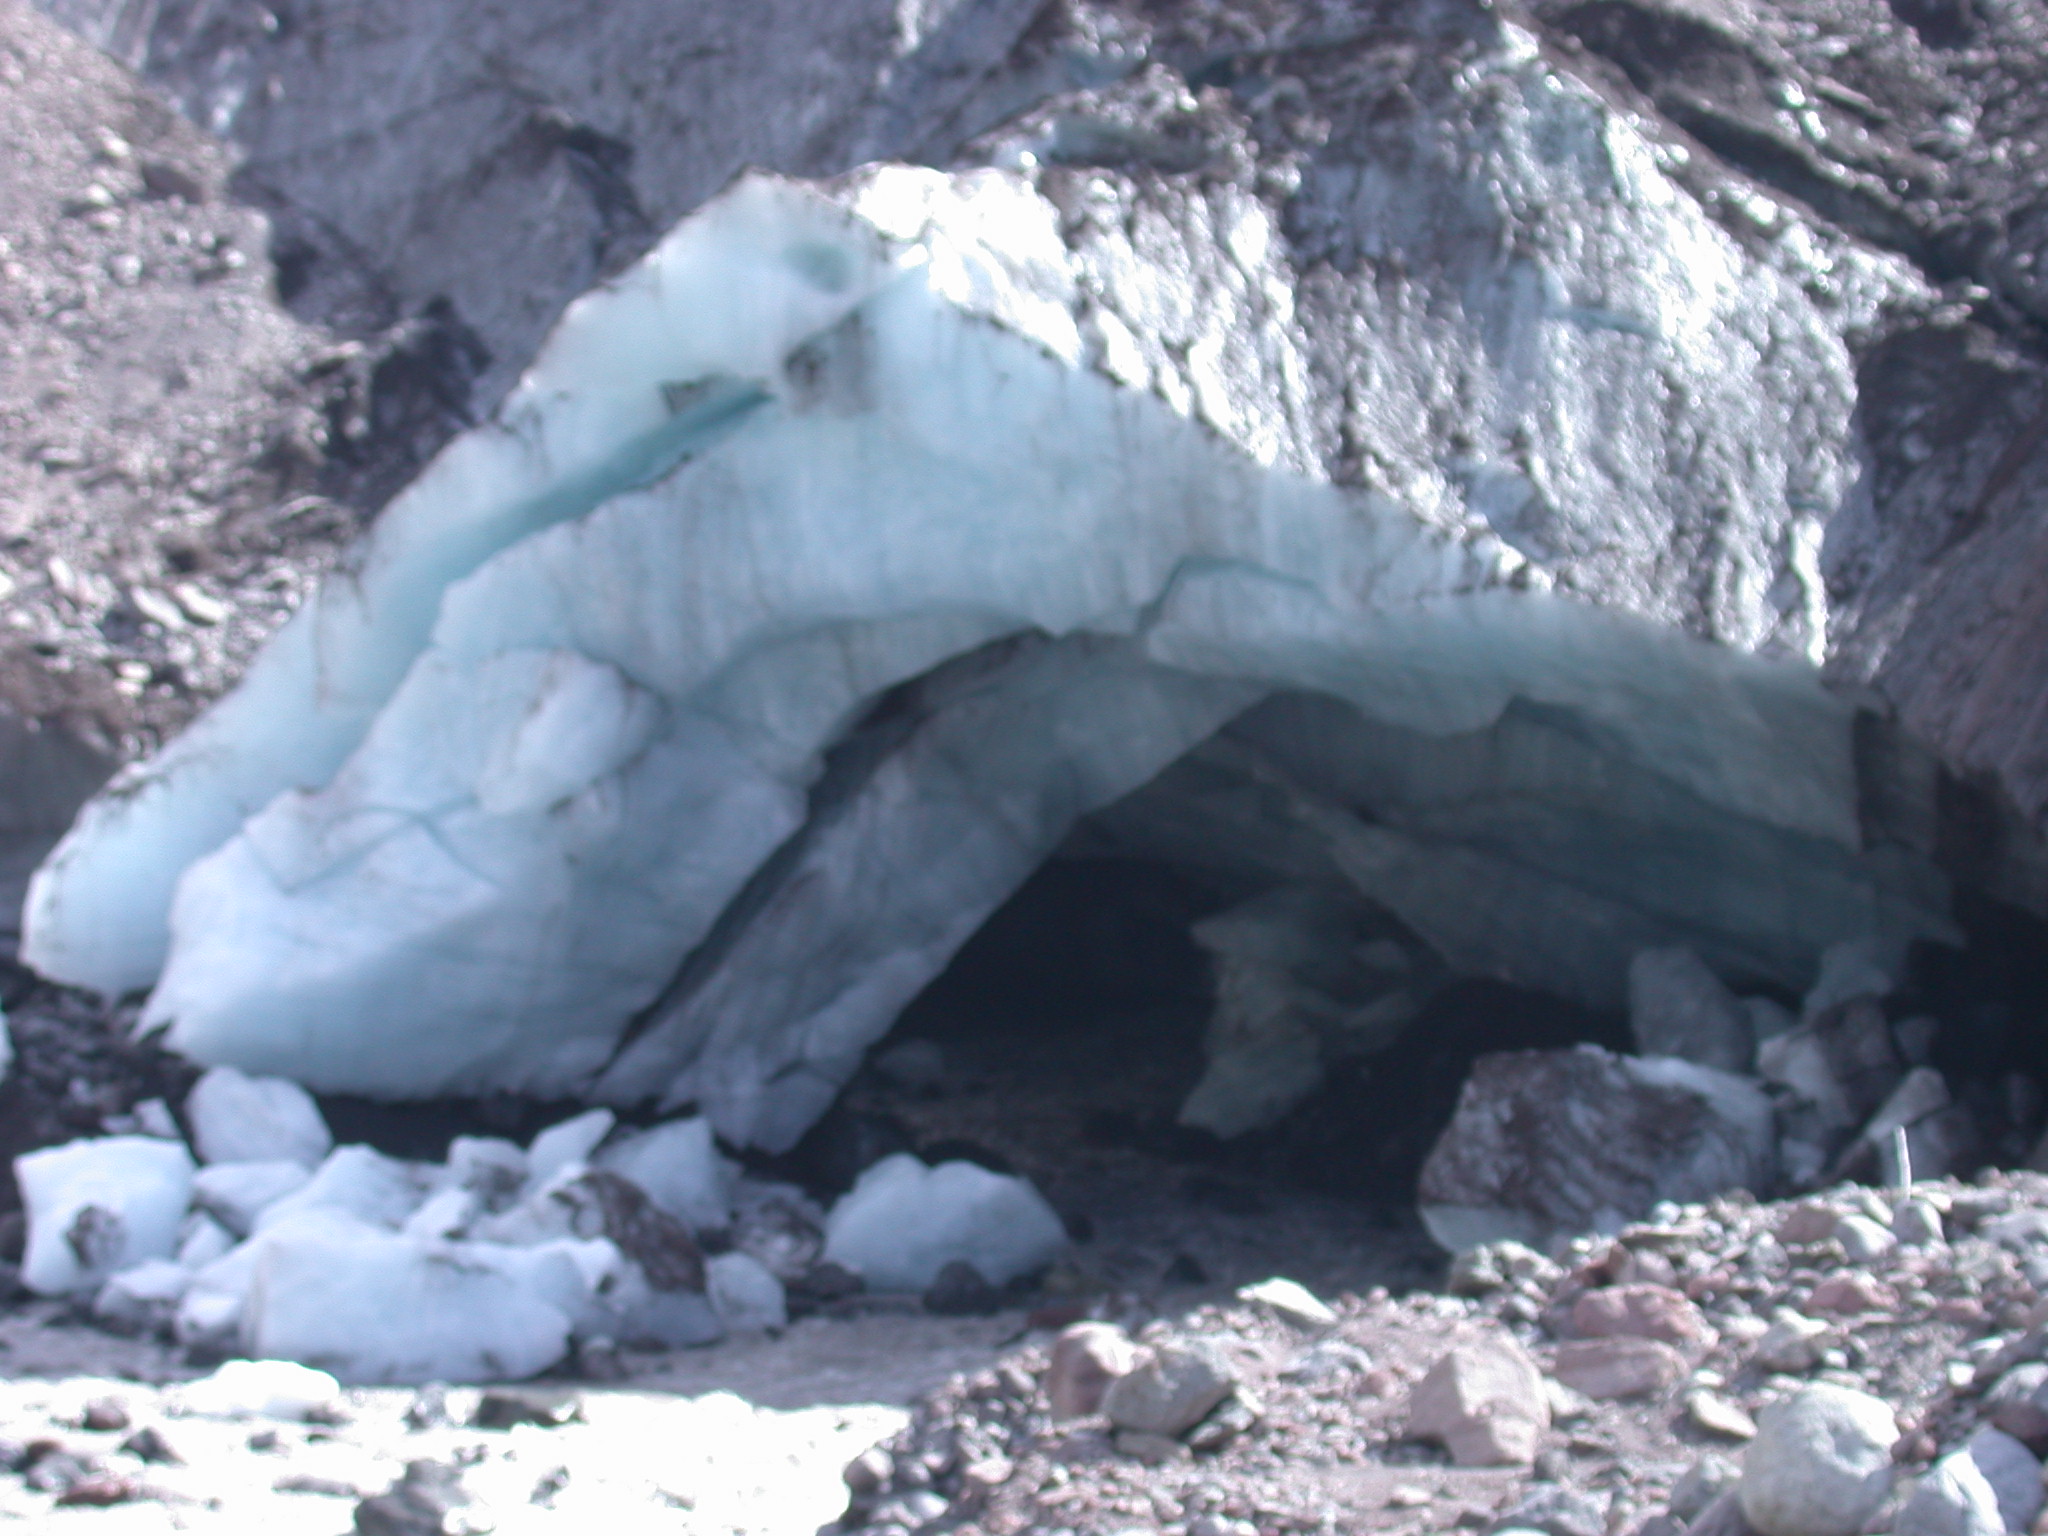 Arrival at the Alabaster Ice Cave at the Base of a Glacier on Mount Rainier